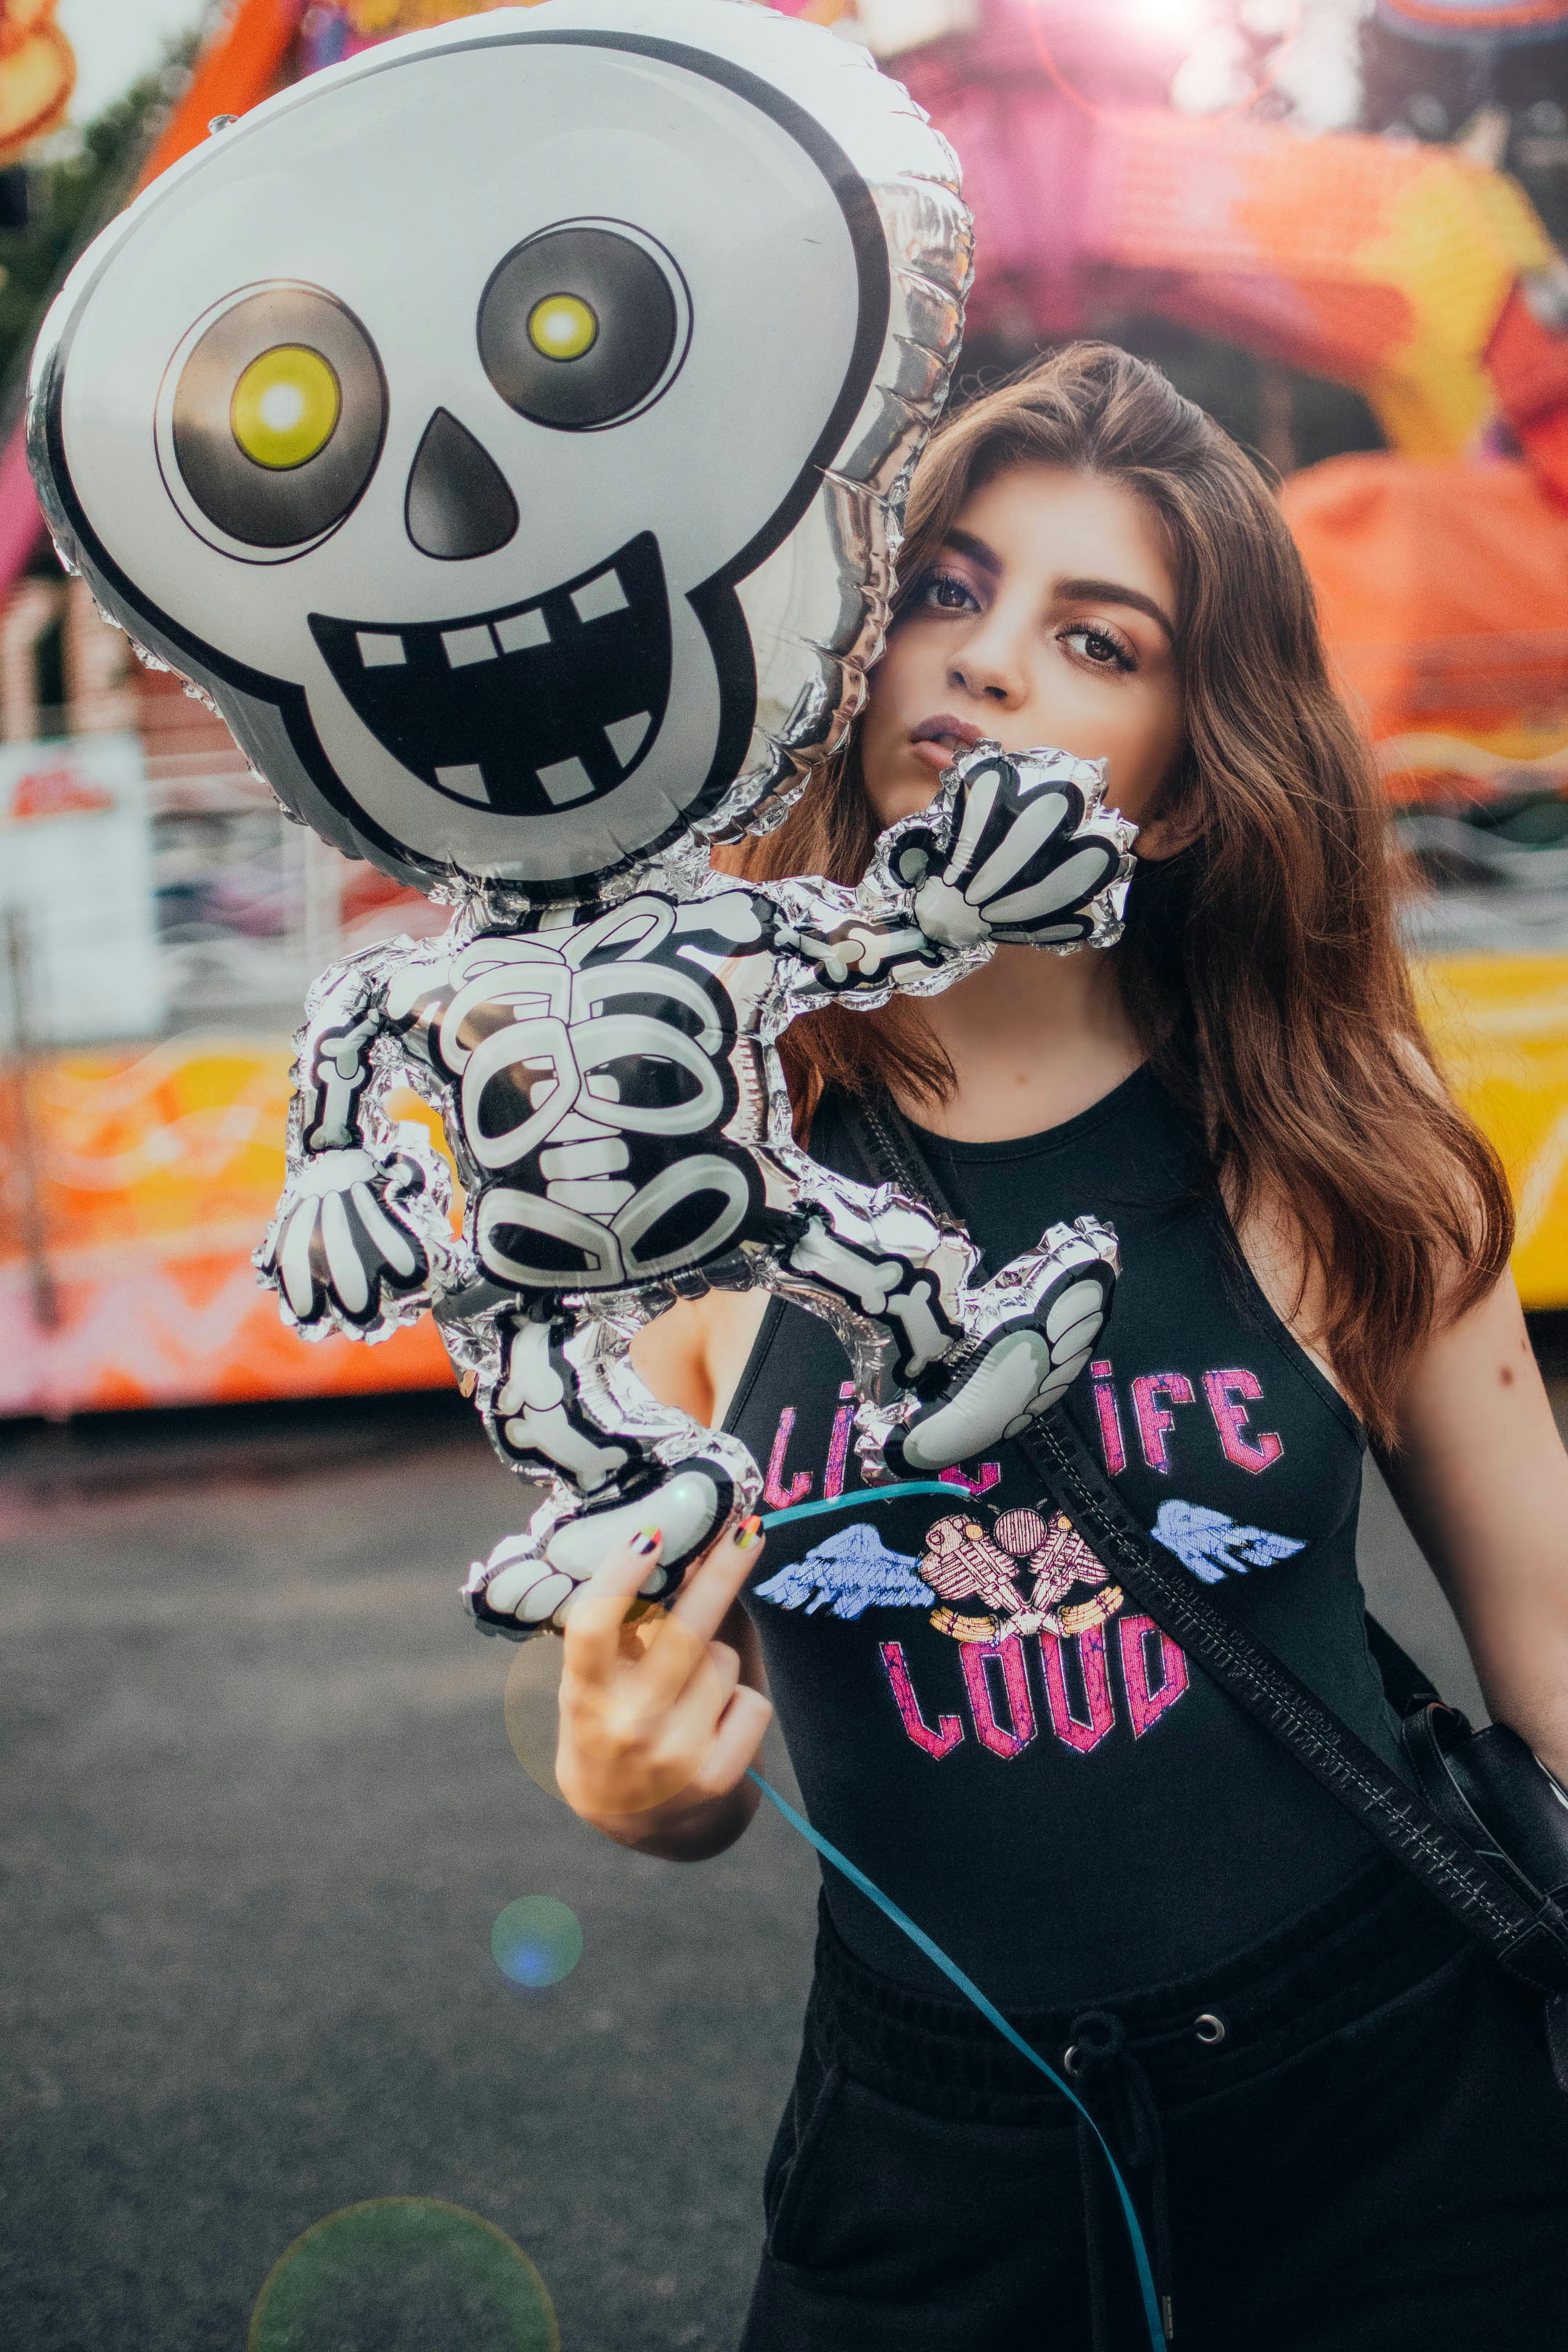 woman in black tank top holding white and black skull print balloon